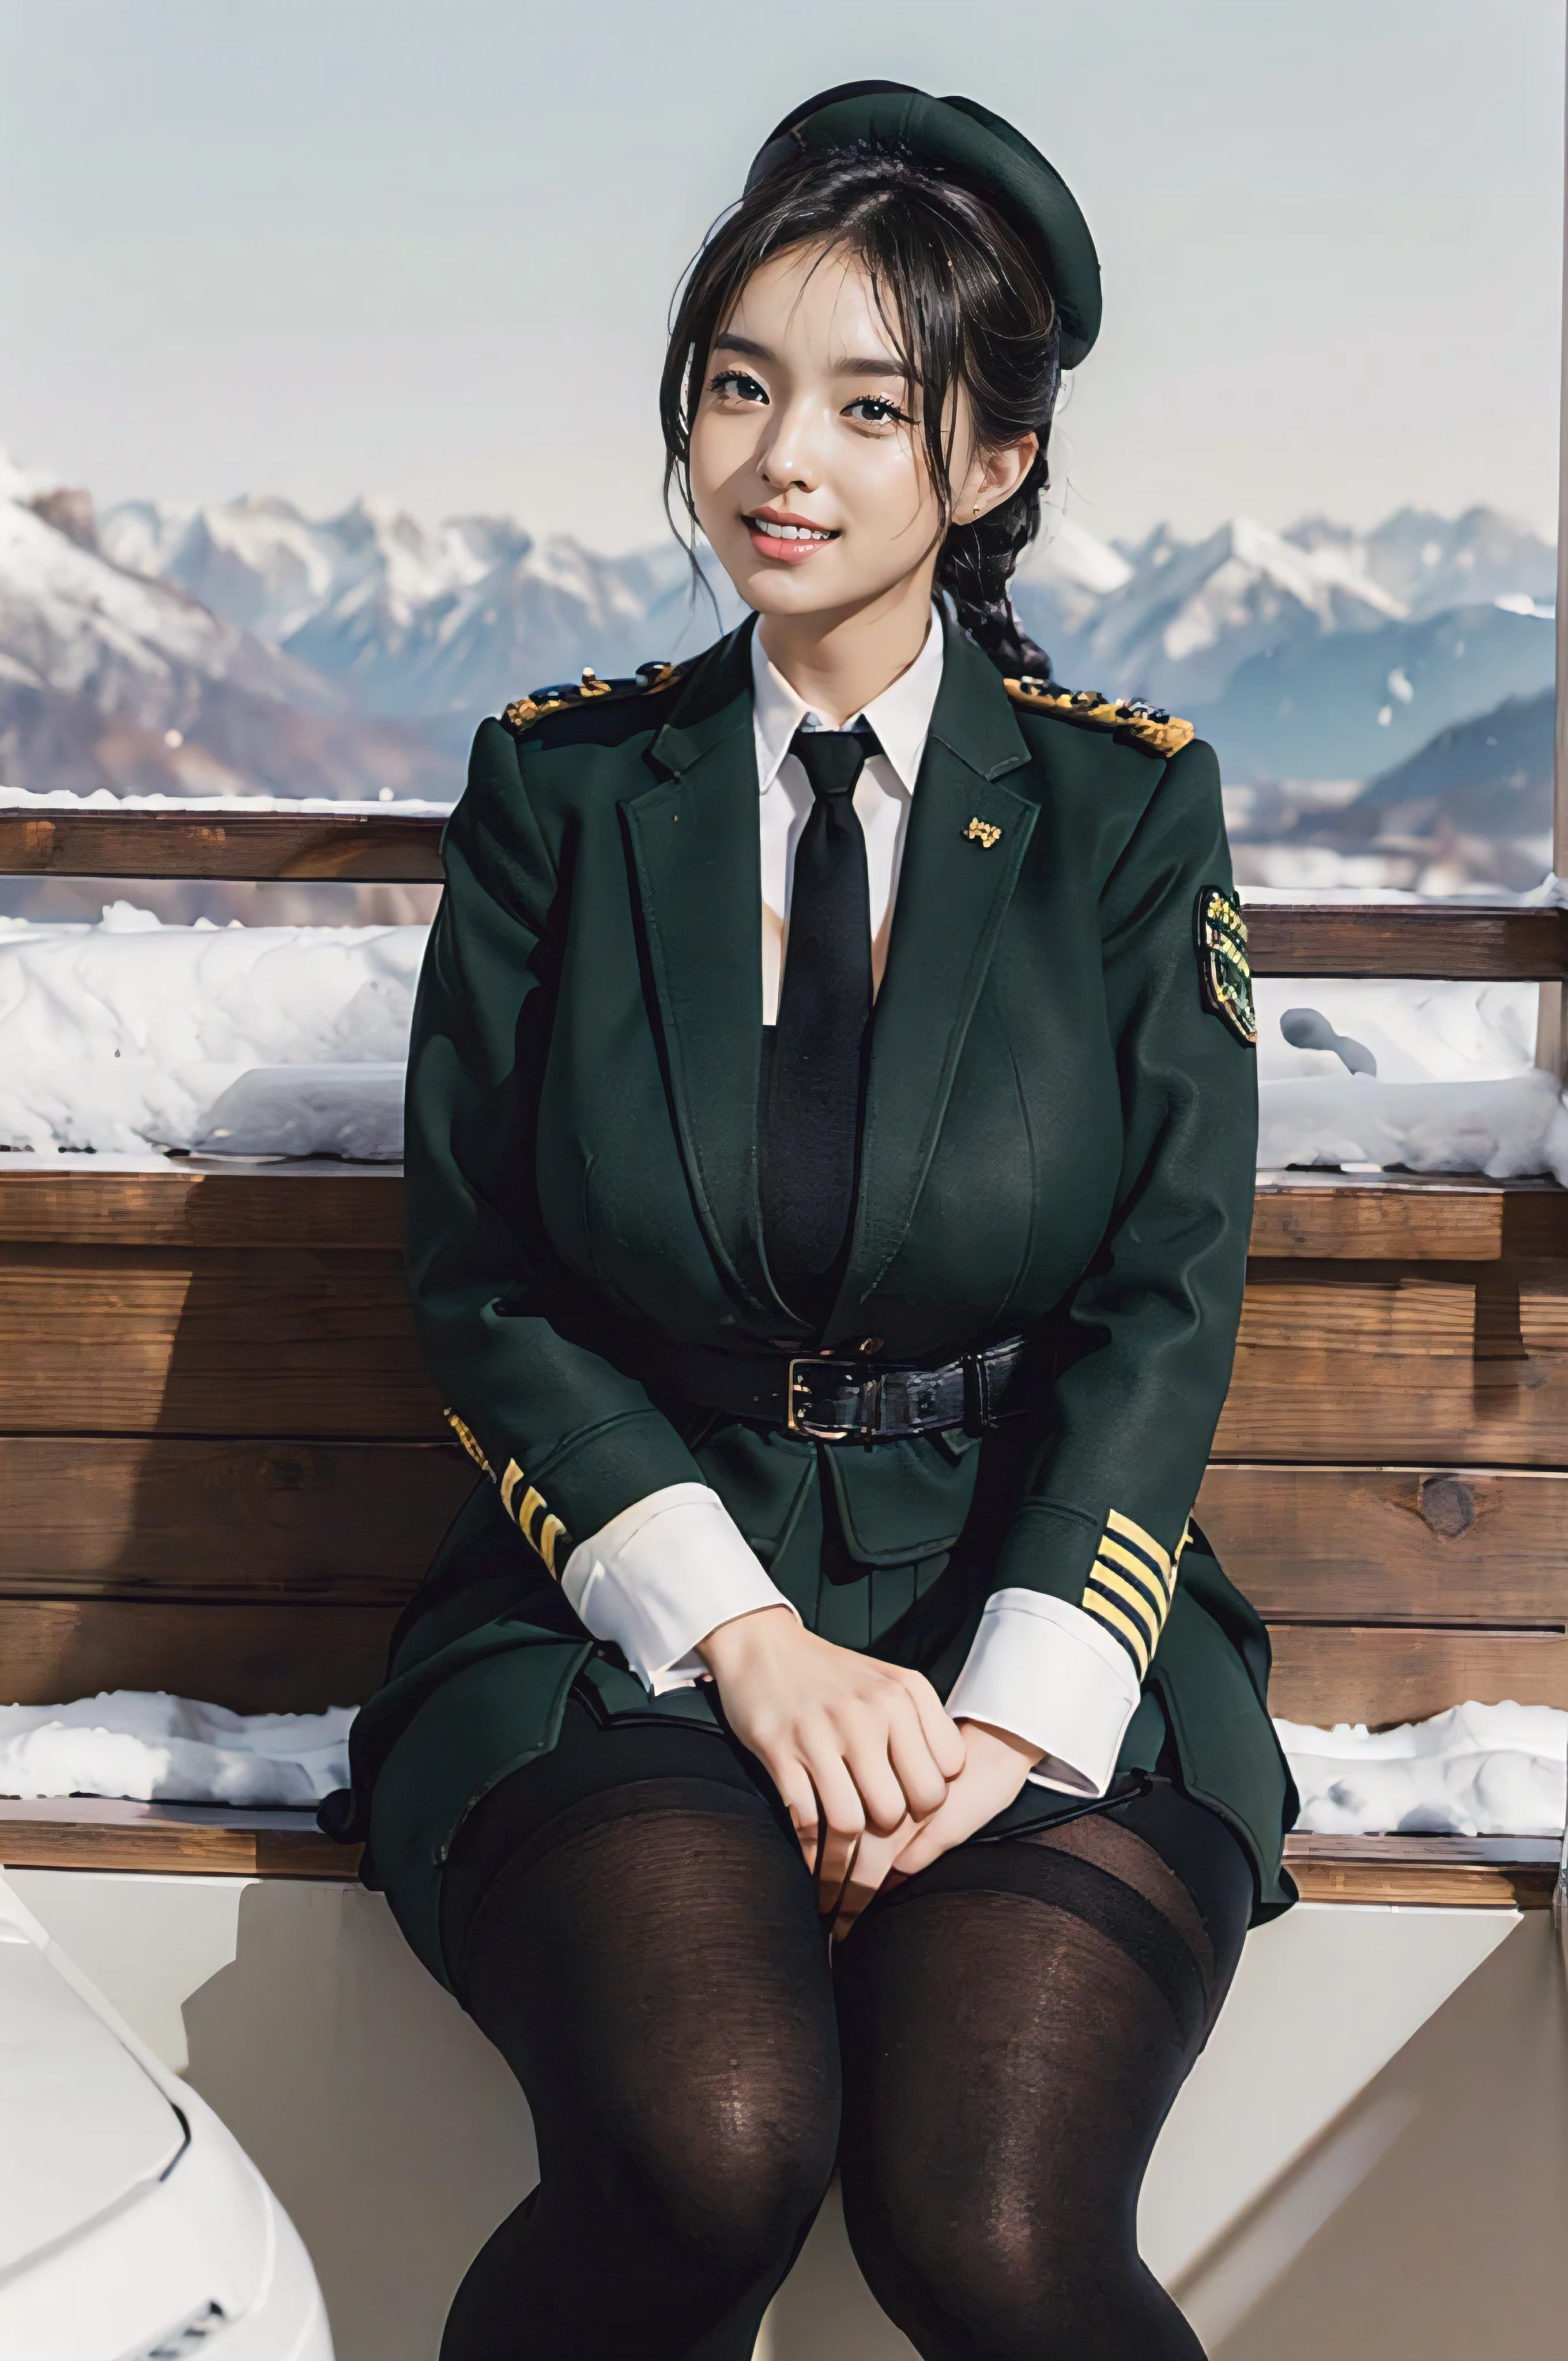 Typically detailed CG Unity 8K wallpaperasterpiece），（best quality），（Super detailed），（Super real photos），（Best character details：1.36），Nikon D750F / 1.4 55mm，original photo，professional lighting， Physically based rendering, 1 plump girl, female soldier，(Dark green military uniform，(Dark green military uniform)，business suit，Fabric texture military uniform, Perfect military calm)，(Wear a plain white shirt under the jacket:1.25)，(black tie)，((Black panty,))，bare legs，plump thigh military cap，Large wavy curls，Do not tie your hair，Short hair details，Twist braids)，golden ratio,[:(Have a delicate face:1.2):0.2]:，pure love face_v1，thick bushy eyebrows,(huge breasts:1.55),(huge ass),(plump thighs:1.45),(wide hips:1.55),((Place your finger to your mouth):1.4)，close-up，((Smile full of confidence， Shy，on snowy mountains):1.35)，(((Close-up of panties),Close-up of chest,face close-up,Front view，))，(sunset sky，gentlesunlight，sunshine on face，(light shining on face)，blue sky，sunny smile，brilliance)，white teeth，(look at me)，(((Tik, bbw sauce, Thick and tight, wide hips, Buttocks swell crazily,🐎🍑,(Spread your legs apart:1.2),attractive pose,sexy pose,A woman in uniform sits cross-legged on a platform, ) )，azure lane style),Tutu database,white stockings,garter belt,spread legs,black pantyhose